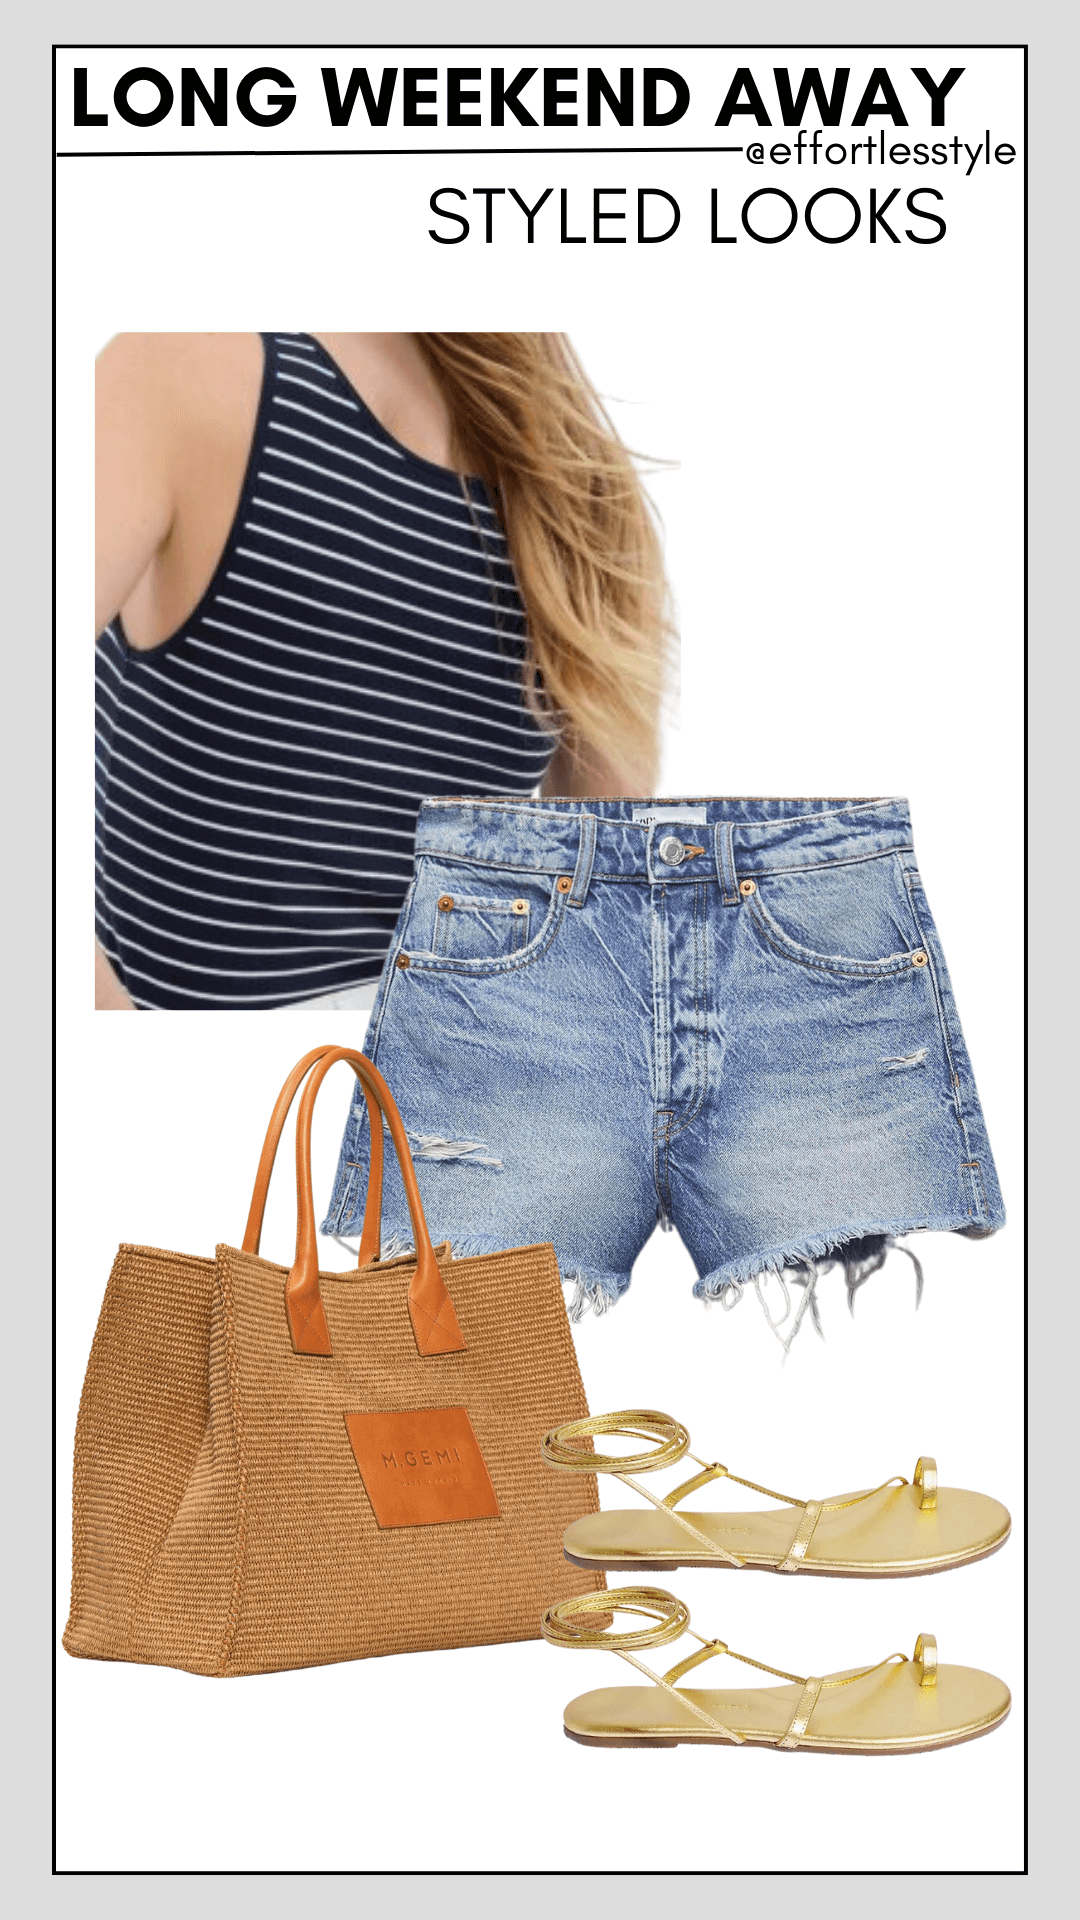 Long Weekend Travel Capsule Striped Scoopneck Tank Top & Denim Shorts how to wear jean shorts in your 40s how to style jean shorts this summer how to accessorize a tank and jean shorts this summer what to pack for a quick trip away how to quickly pack your suitcase style inspiration for a quick trip away